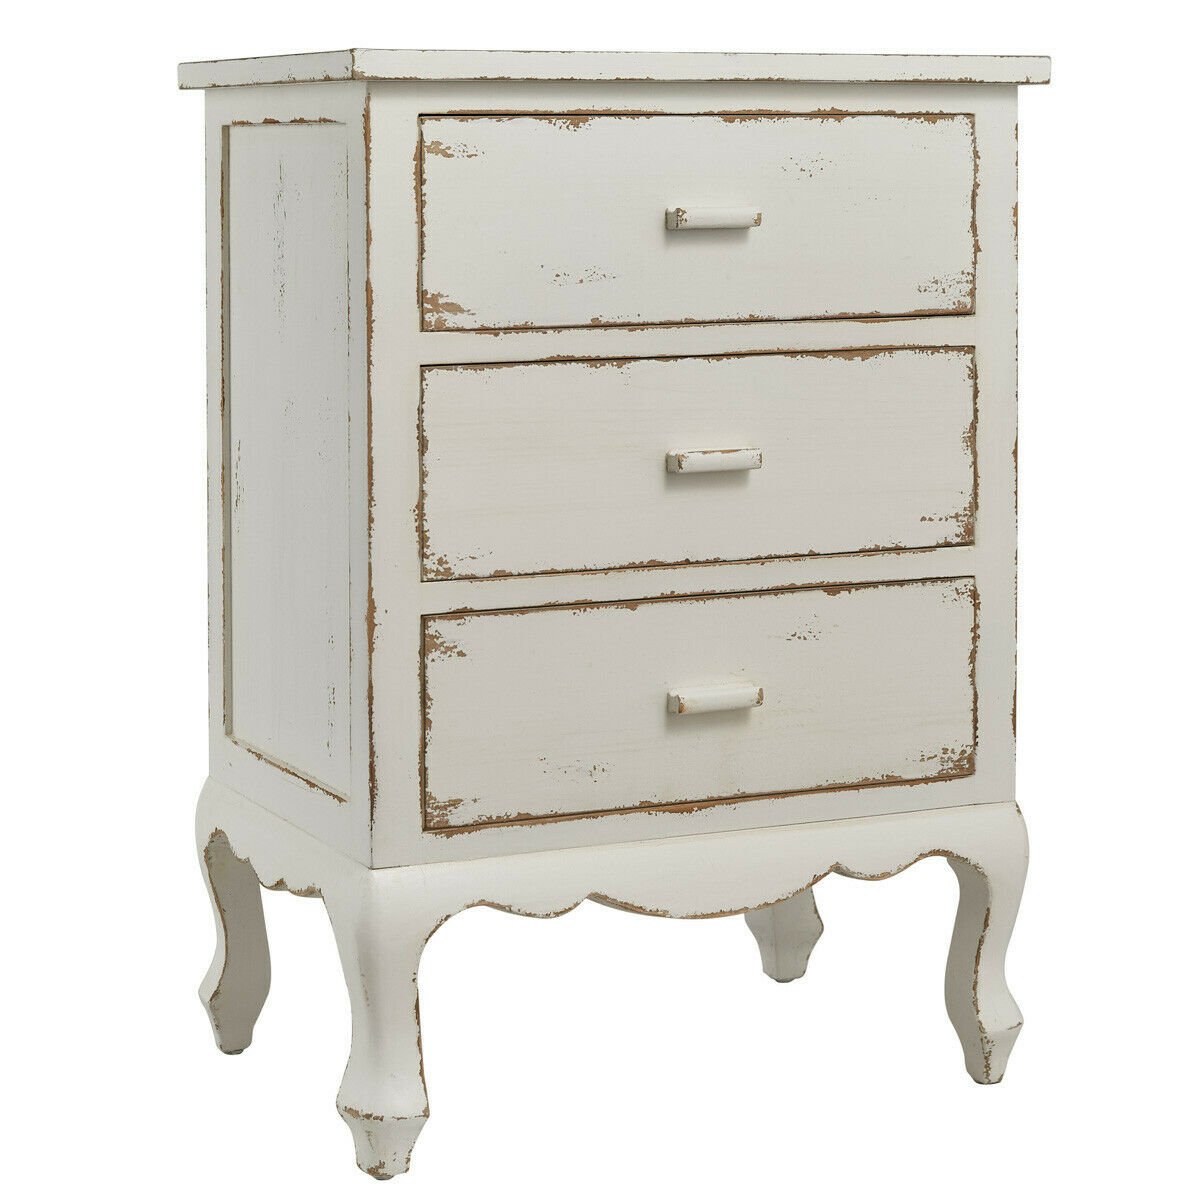 Primitive Distressed White 3 Drawer Cupboard Nightstand Farmhouse - The Primitive Pineapple Collection